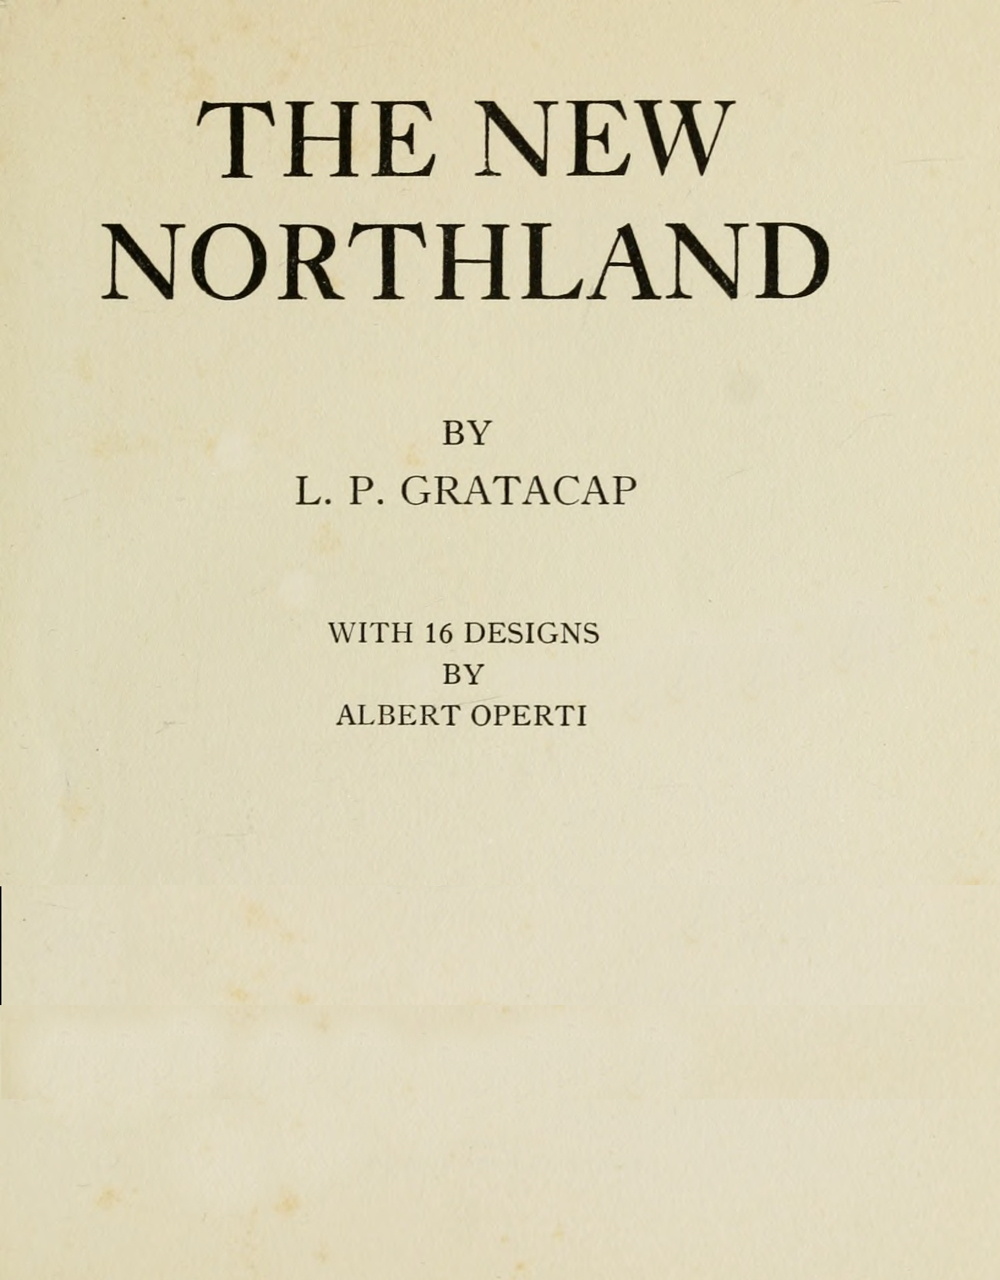 The new northland